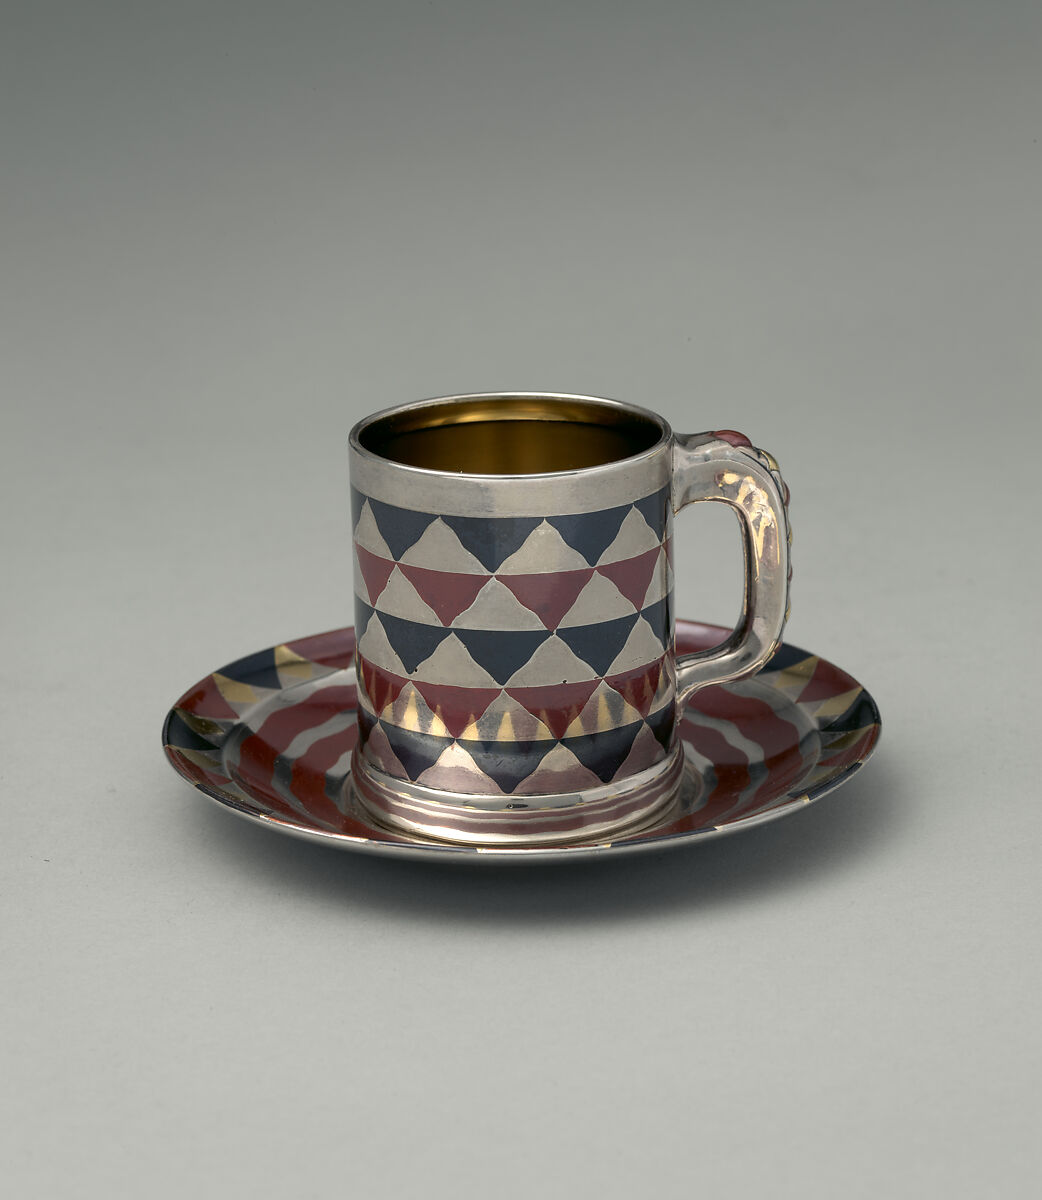 Cup and saucer, Tiffany & Co., Silver, patinated copper,  patinated copper-platinum-iron alloy, and gold, American